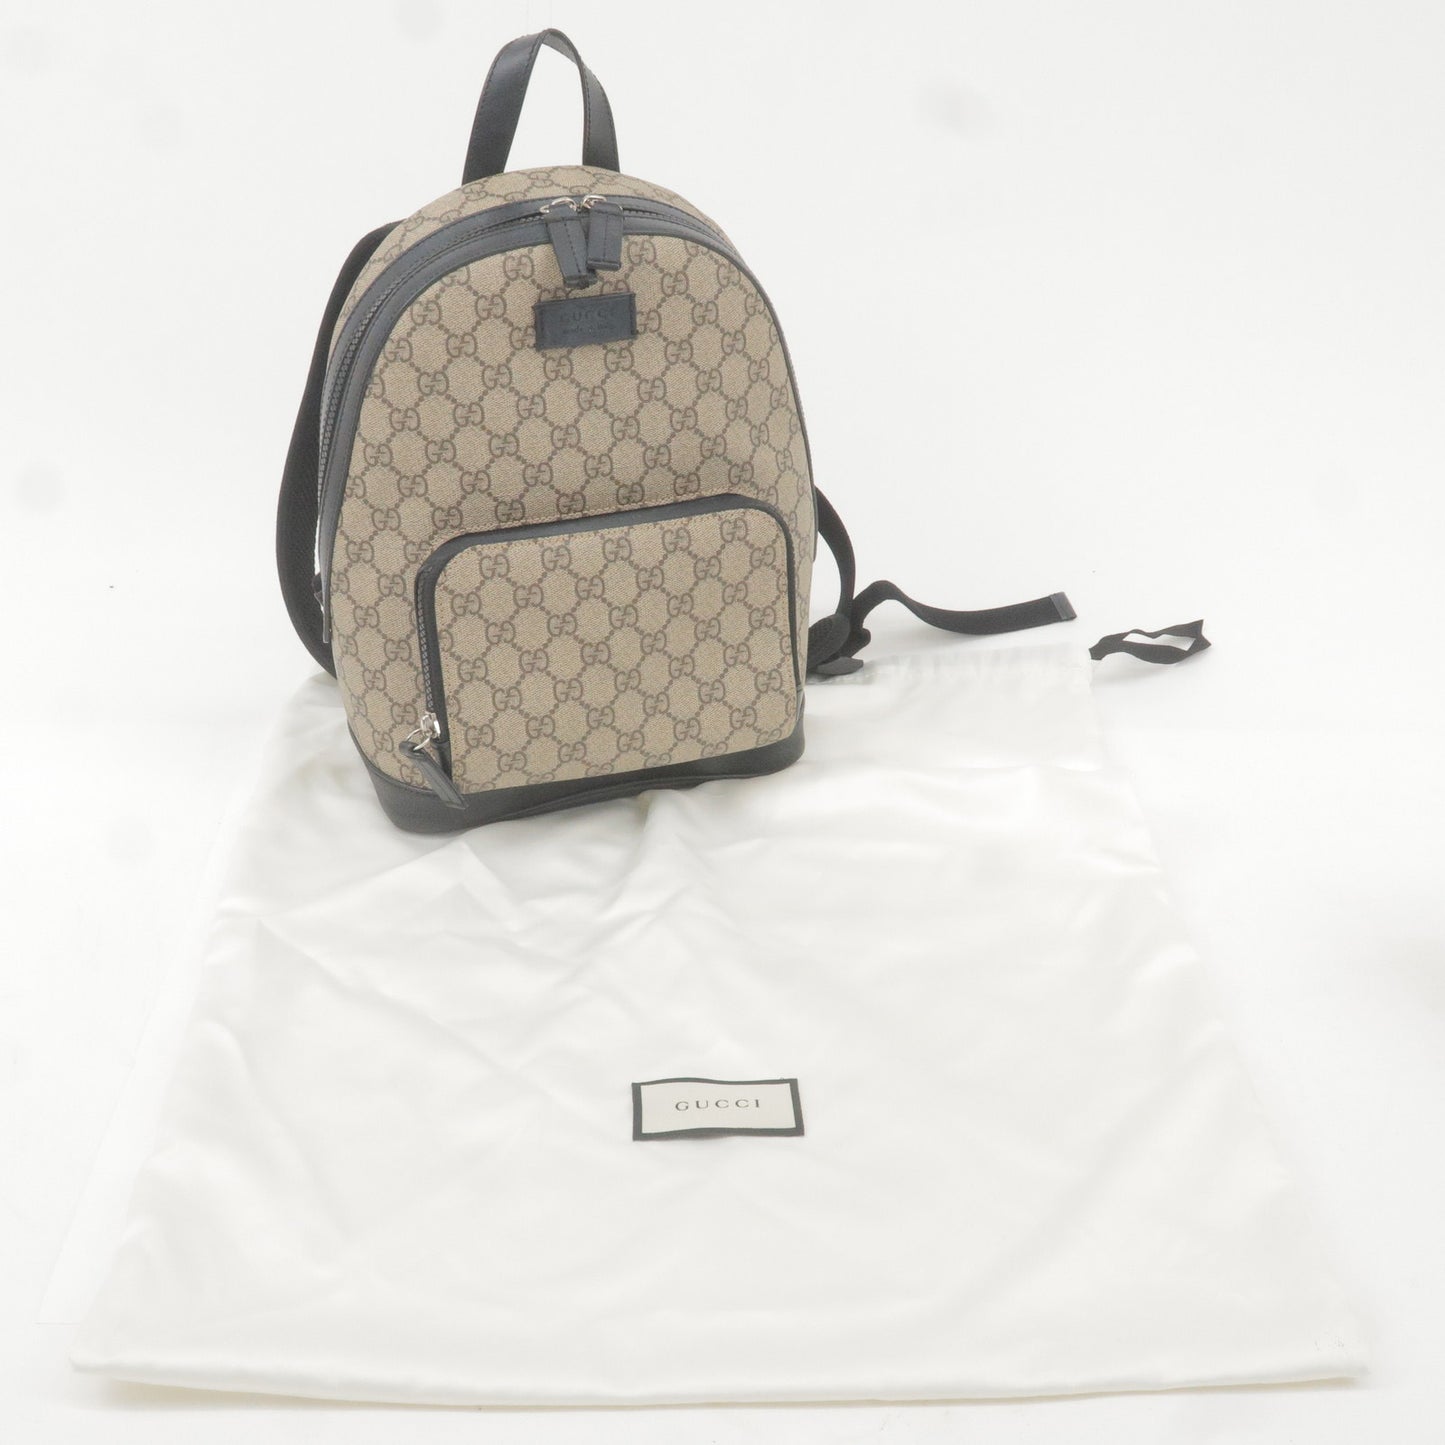 GUCCI GG Supreme Leather Small Back Pack Beige Black 429020